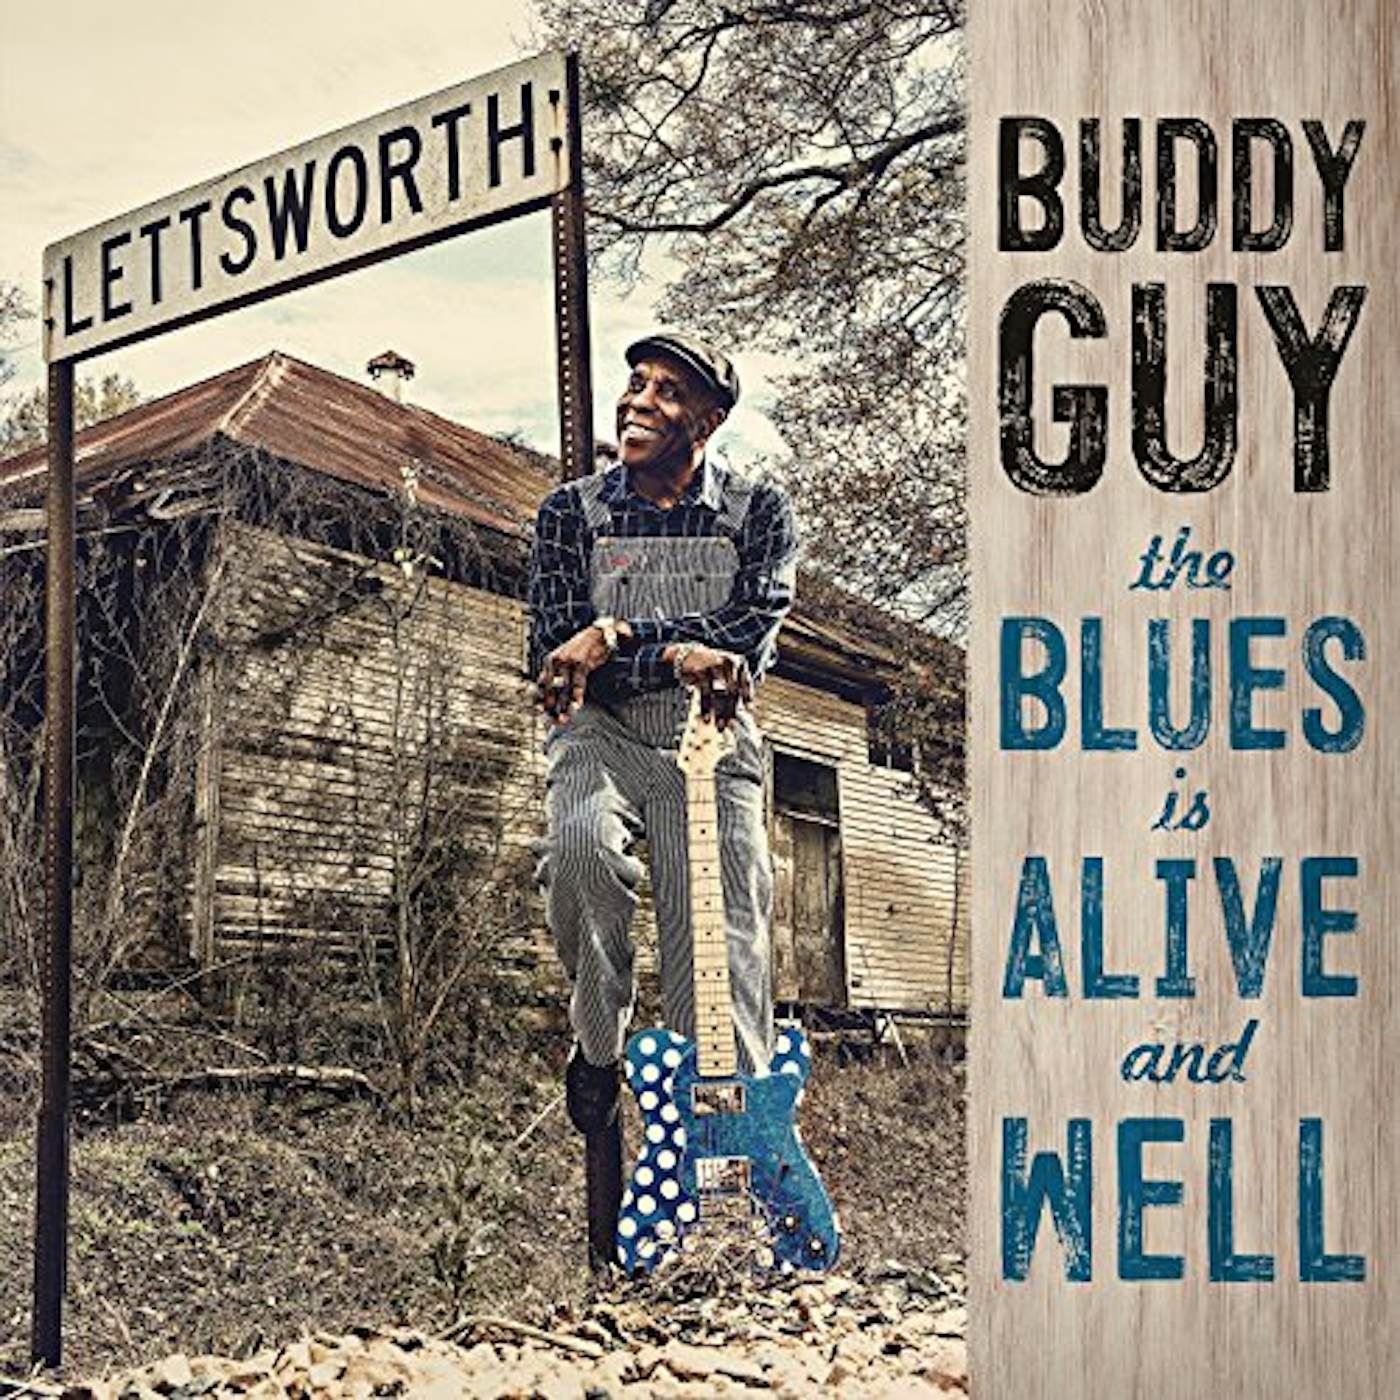 Buddy Guy BLUES IS ALIVE & WELL Vinyl Record